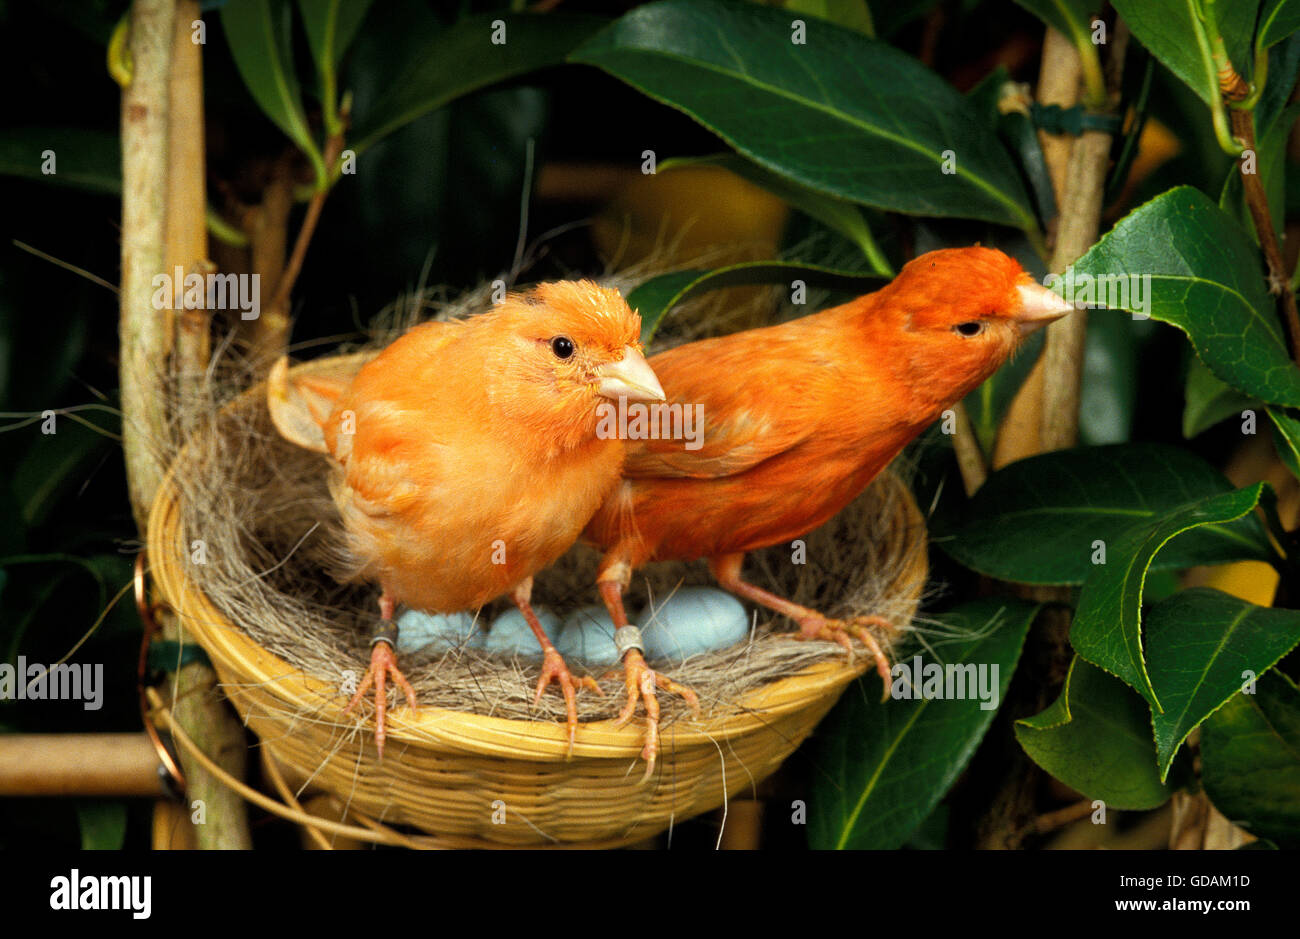 RED CANARY, COUPLE IN NEST WITH EGGS Stock Photo